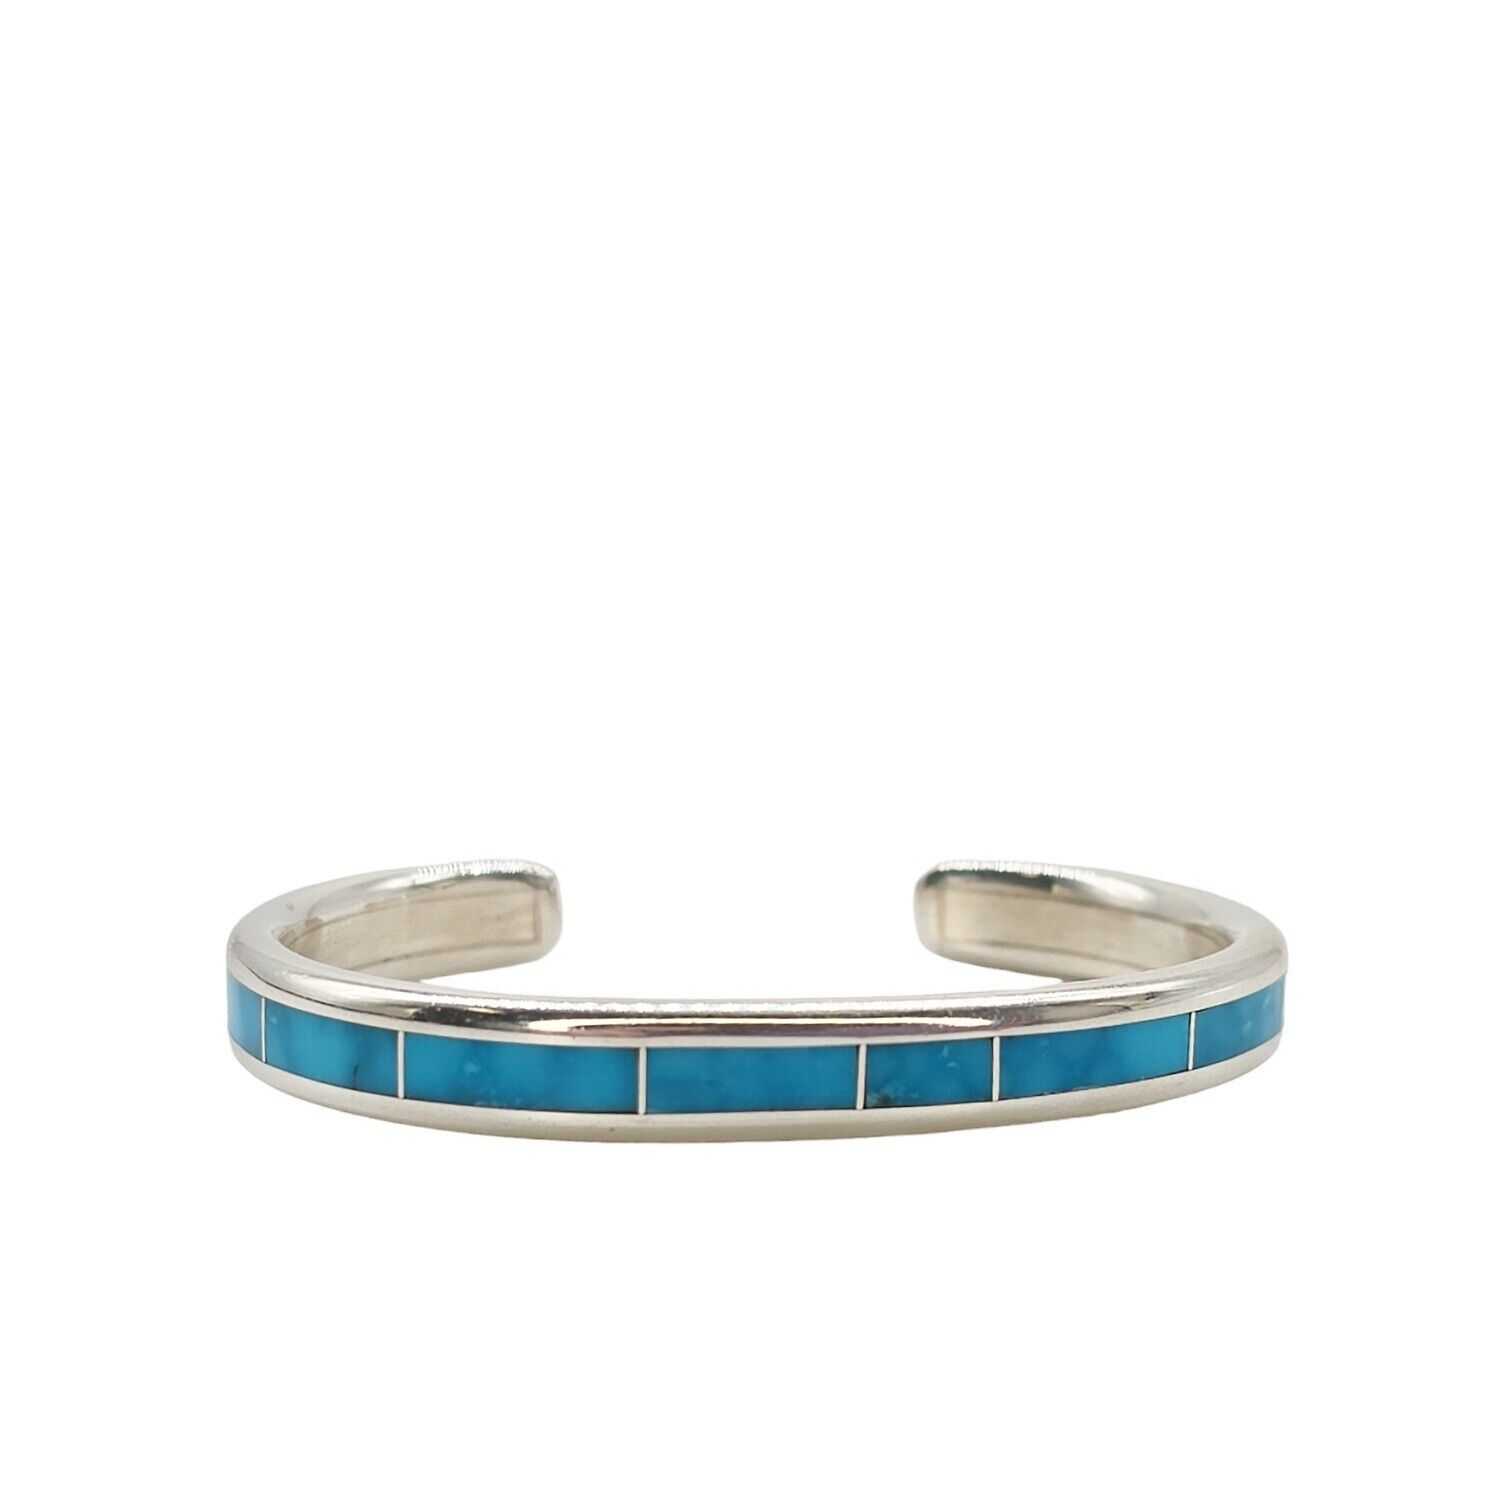 Zuni Lawrence Loretto Sterling Silver & Turquoise Inlay Cuff Bracelet